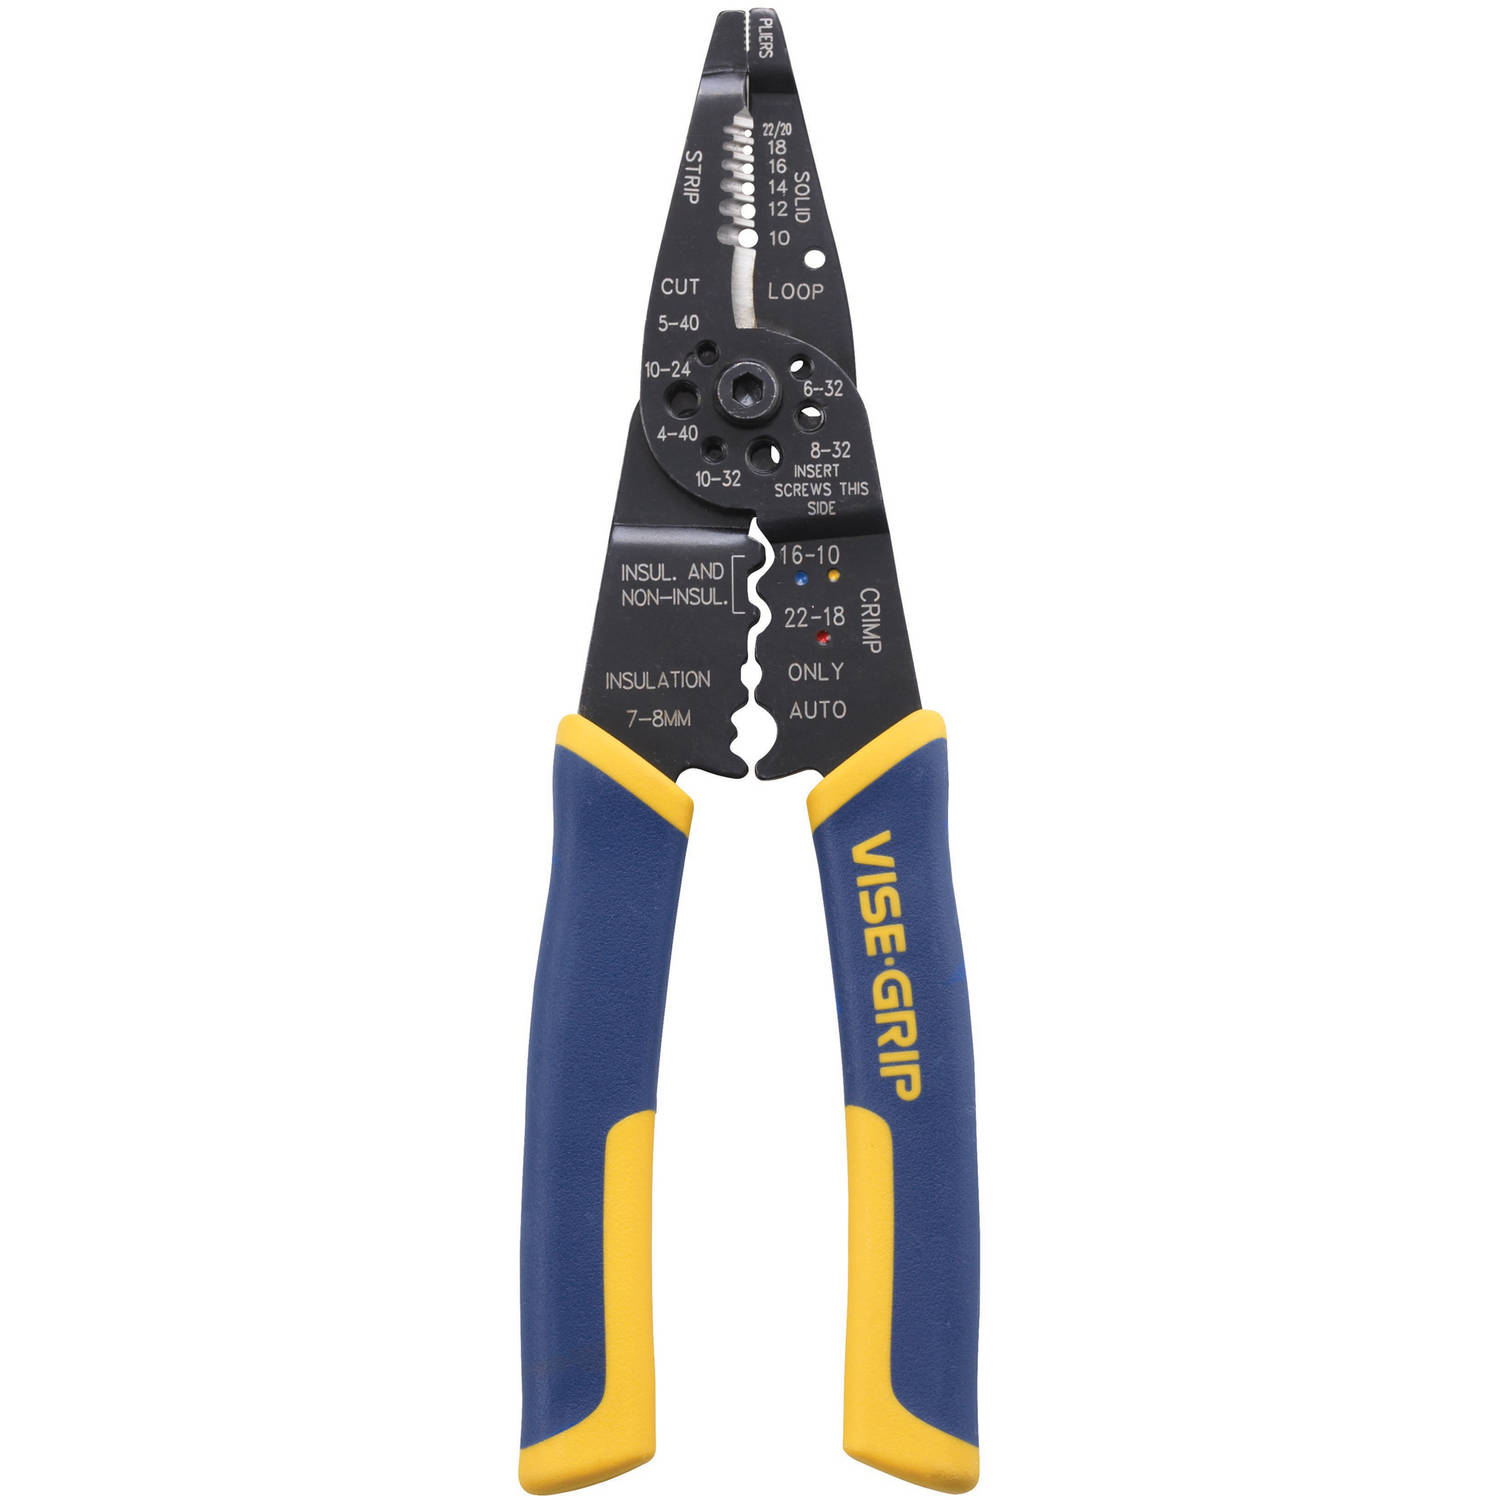 Vise Grip 8.5 in. Wire Stripper and Cutter - image 2 of 2